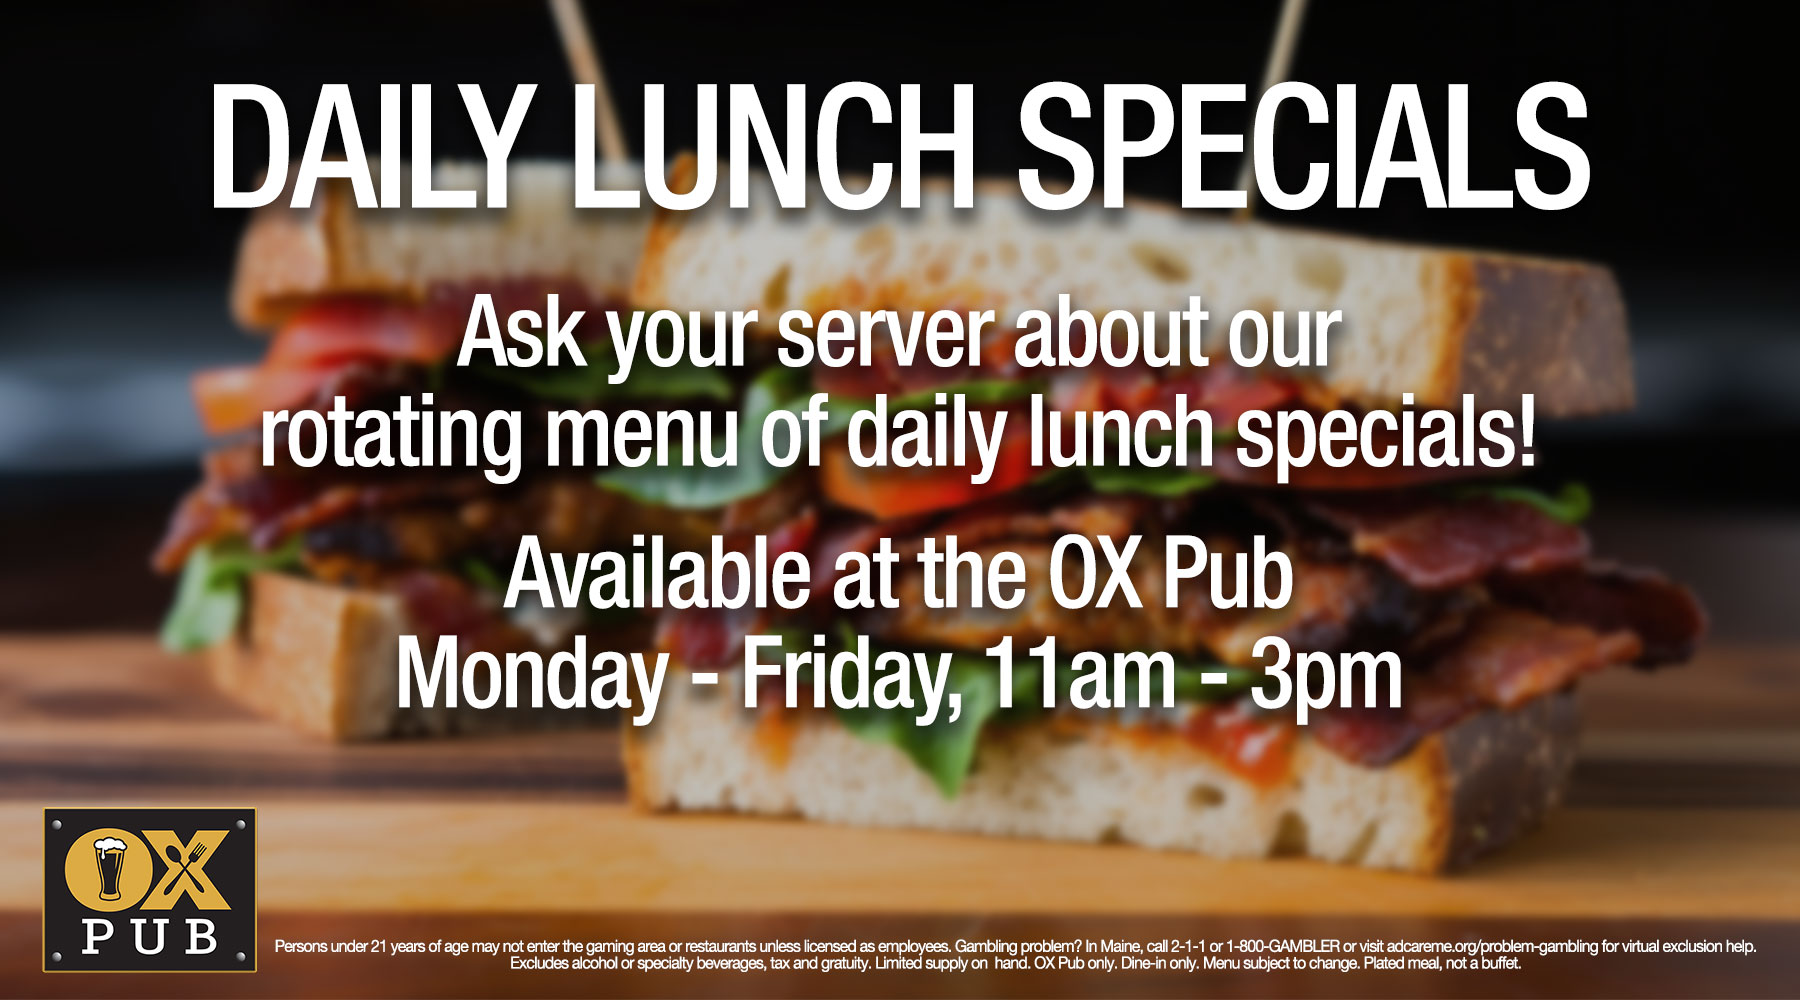 Lunch specials available at OX Pub, Monday-Friday